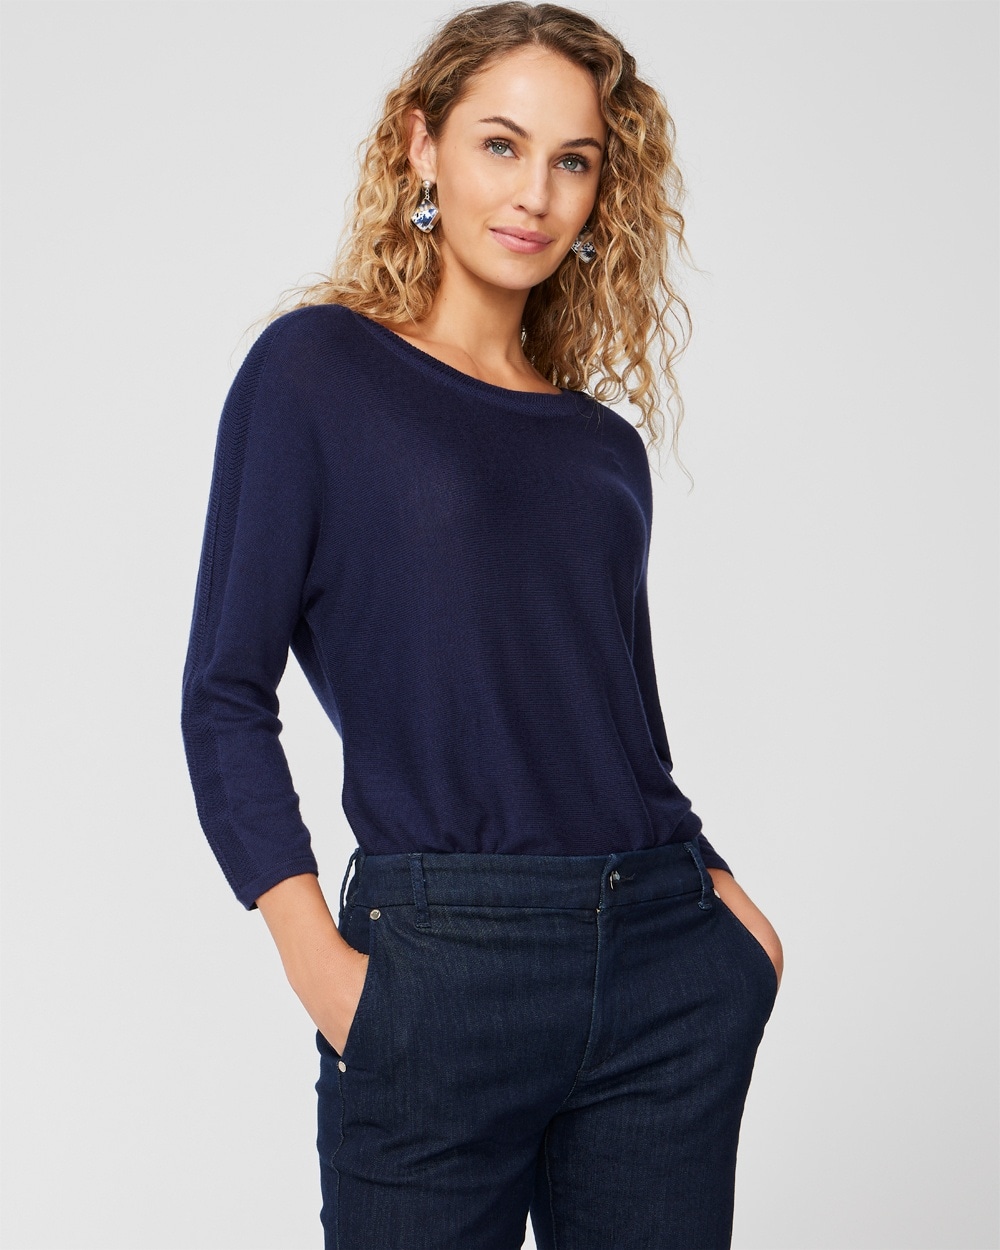 Touch of Cashmere Novelty Trim Sweater